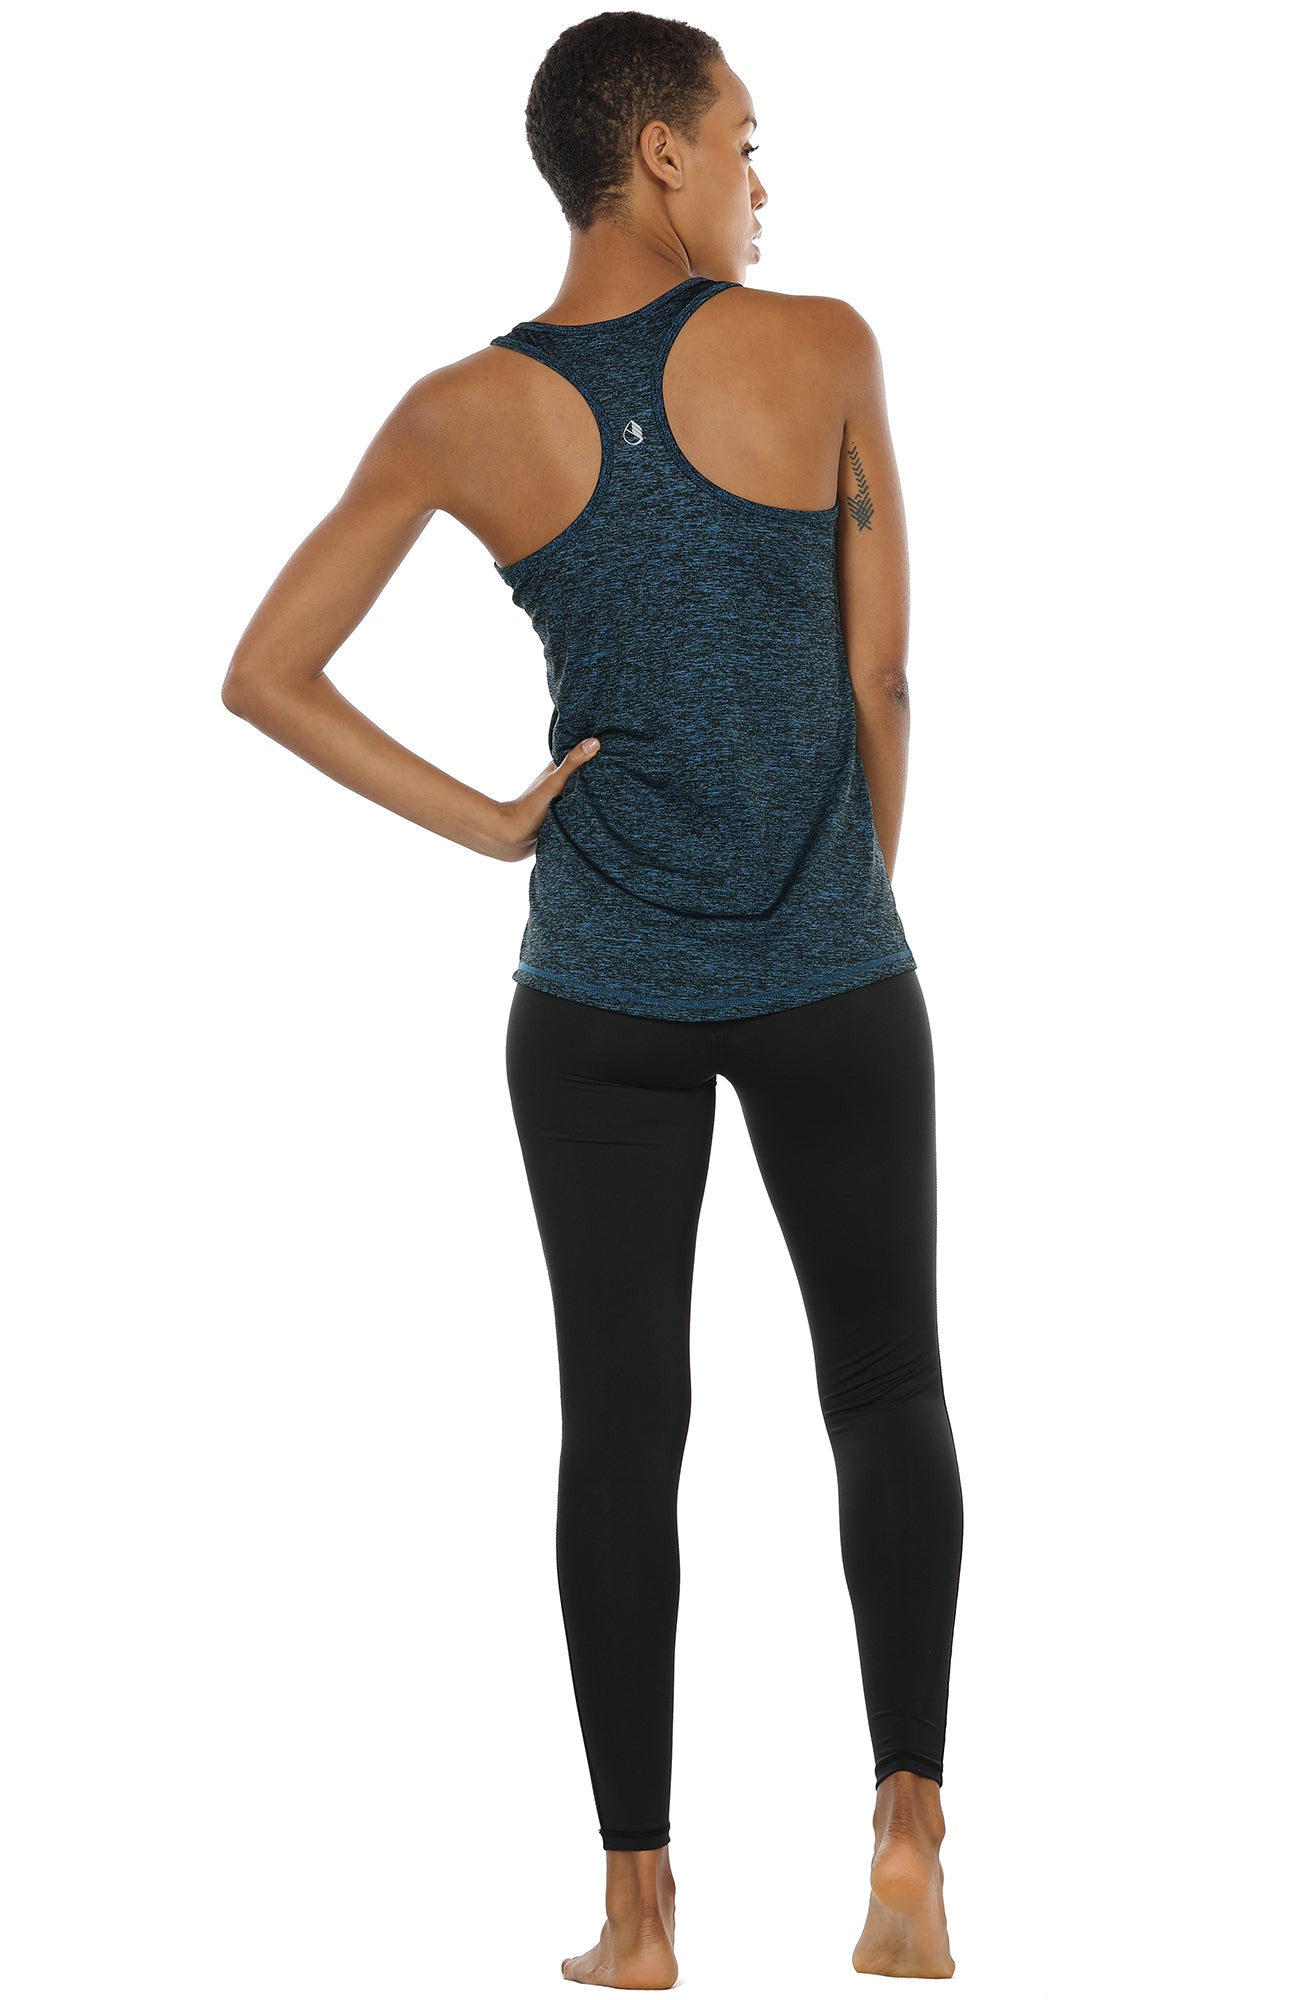 TK9-S icyzone Activewear Running Workouts Clothes Yoga Racerback